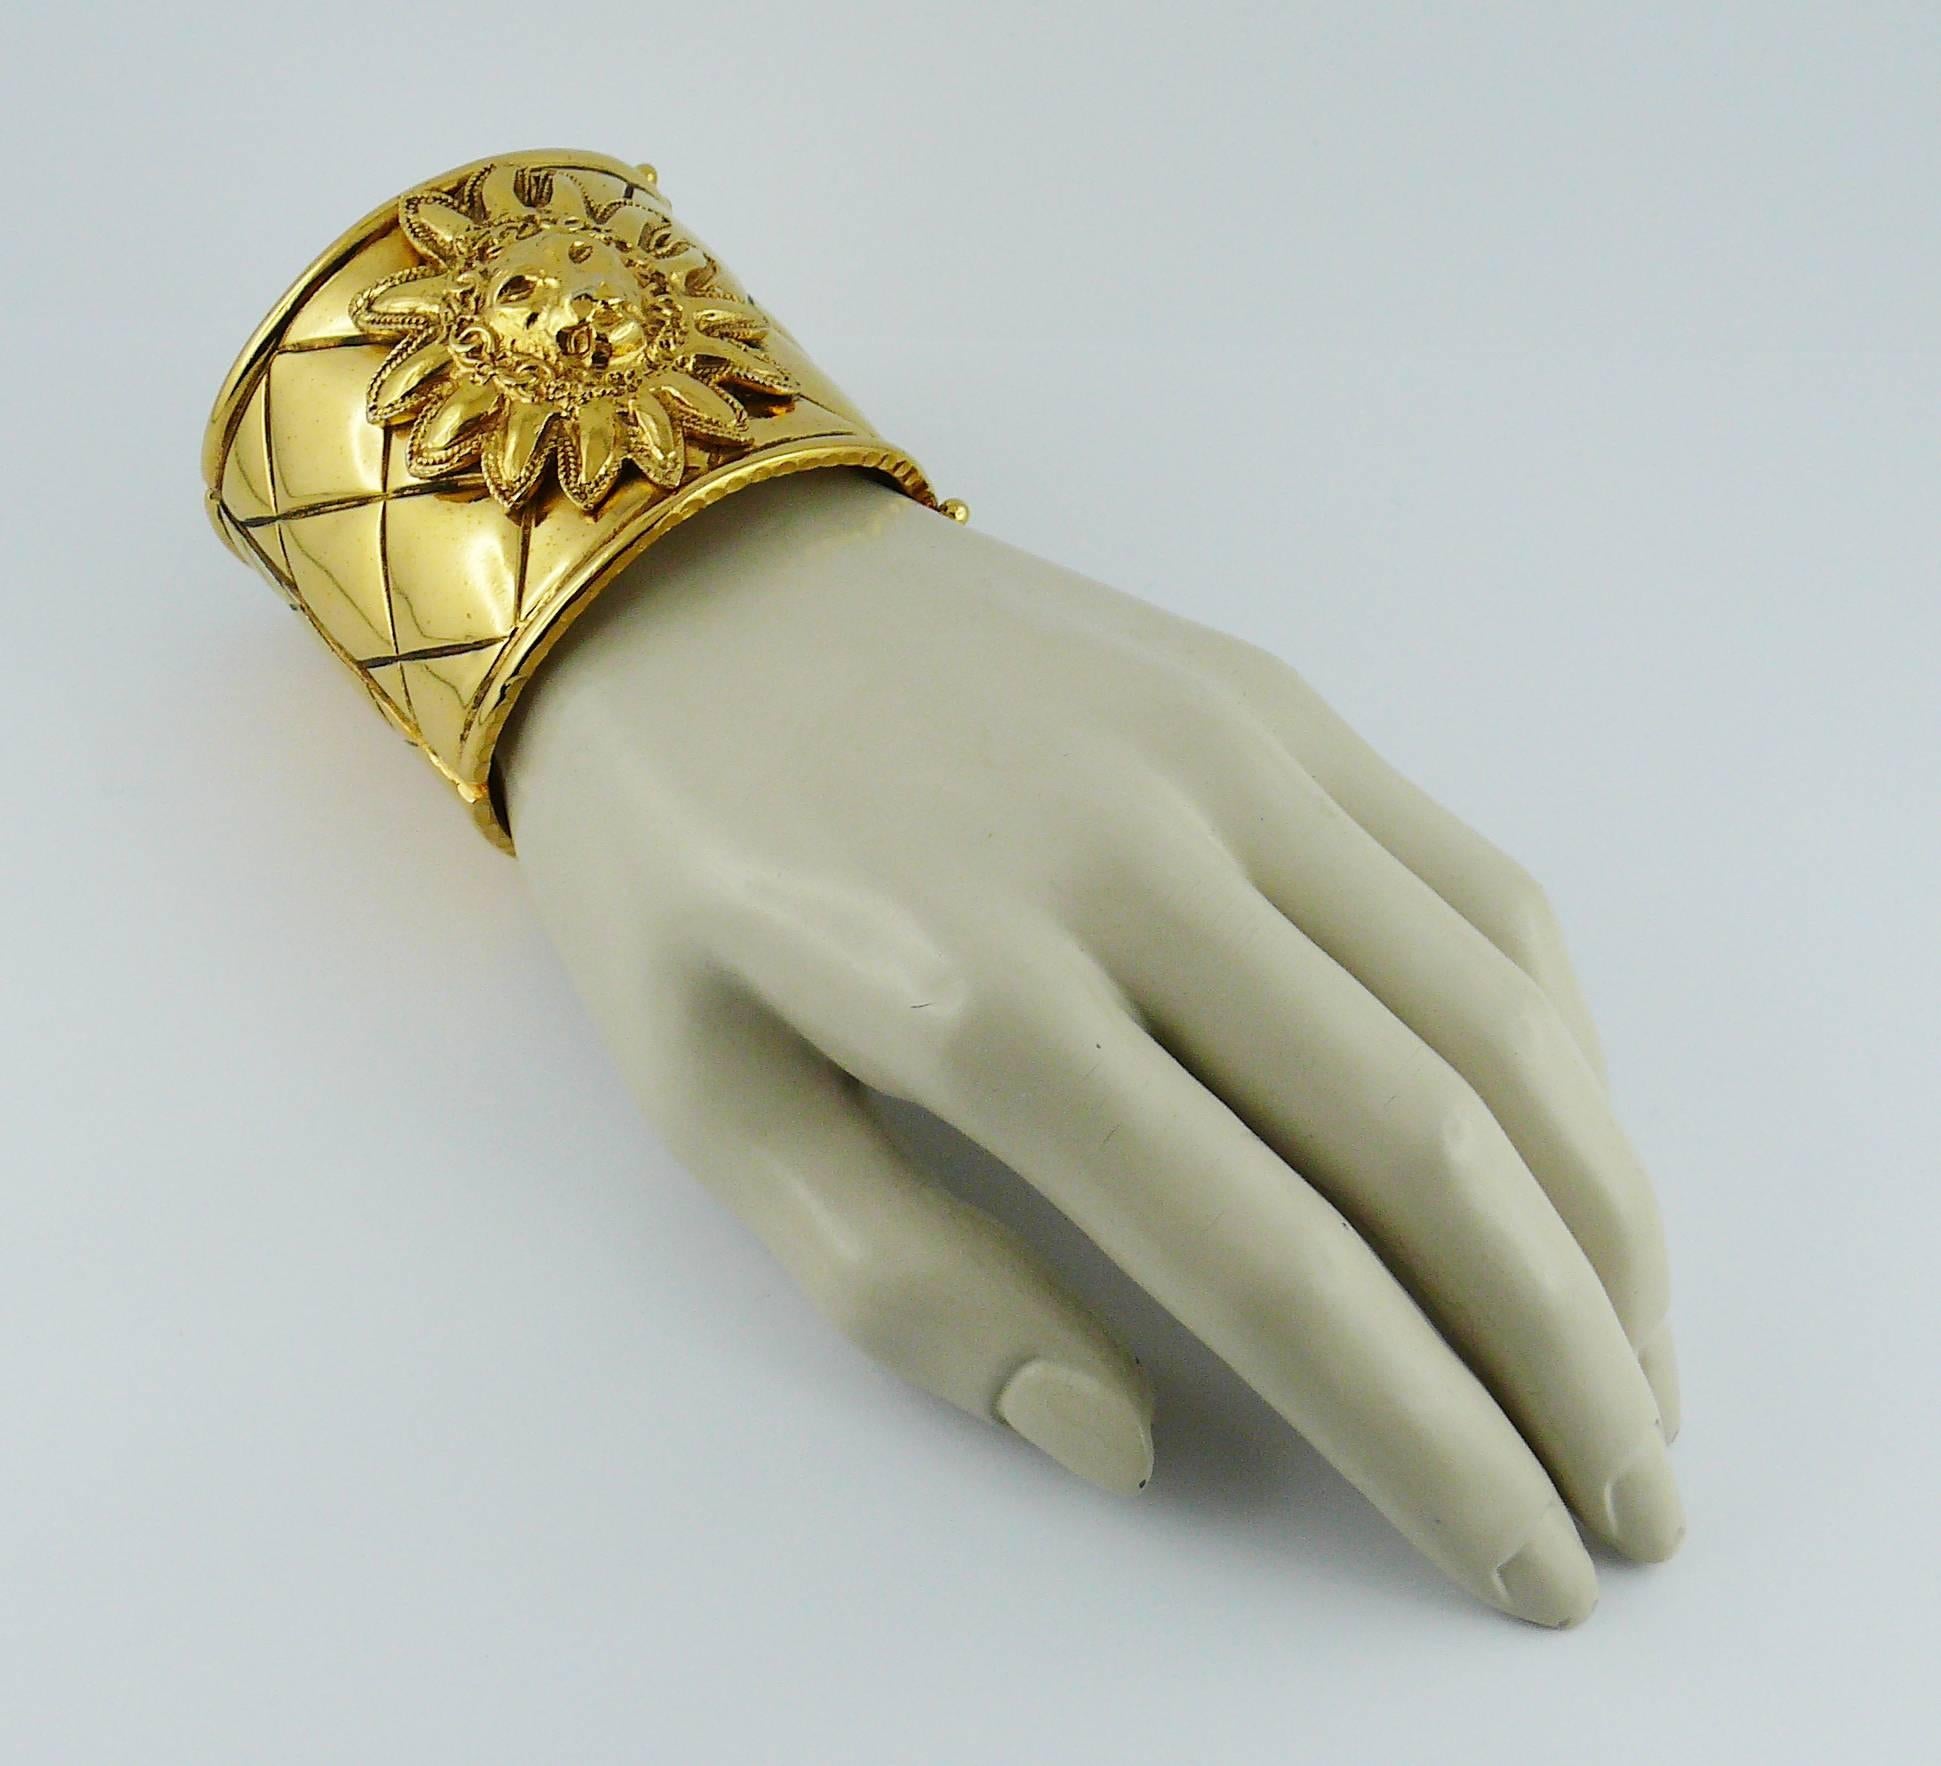 CHANEL vintage iconic cuff bracelet featuring a quilted pattern with an applied lion head in the center.

Two safety latches closure.

Marked CHANEL Made in France.
Engraved with the 